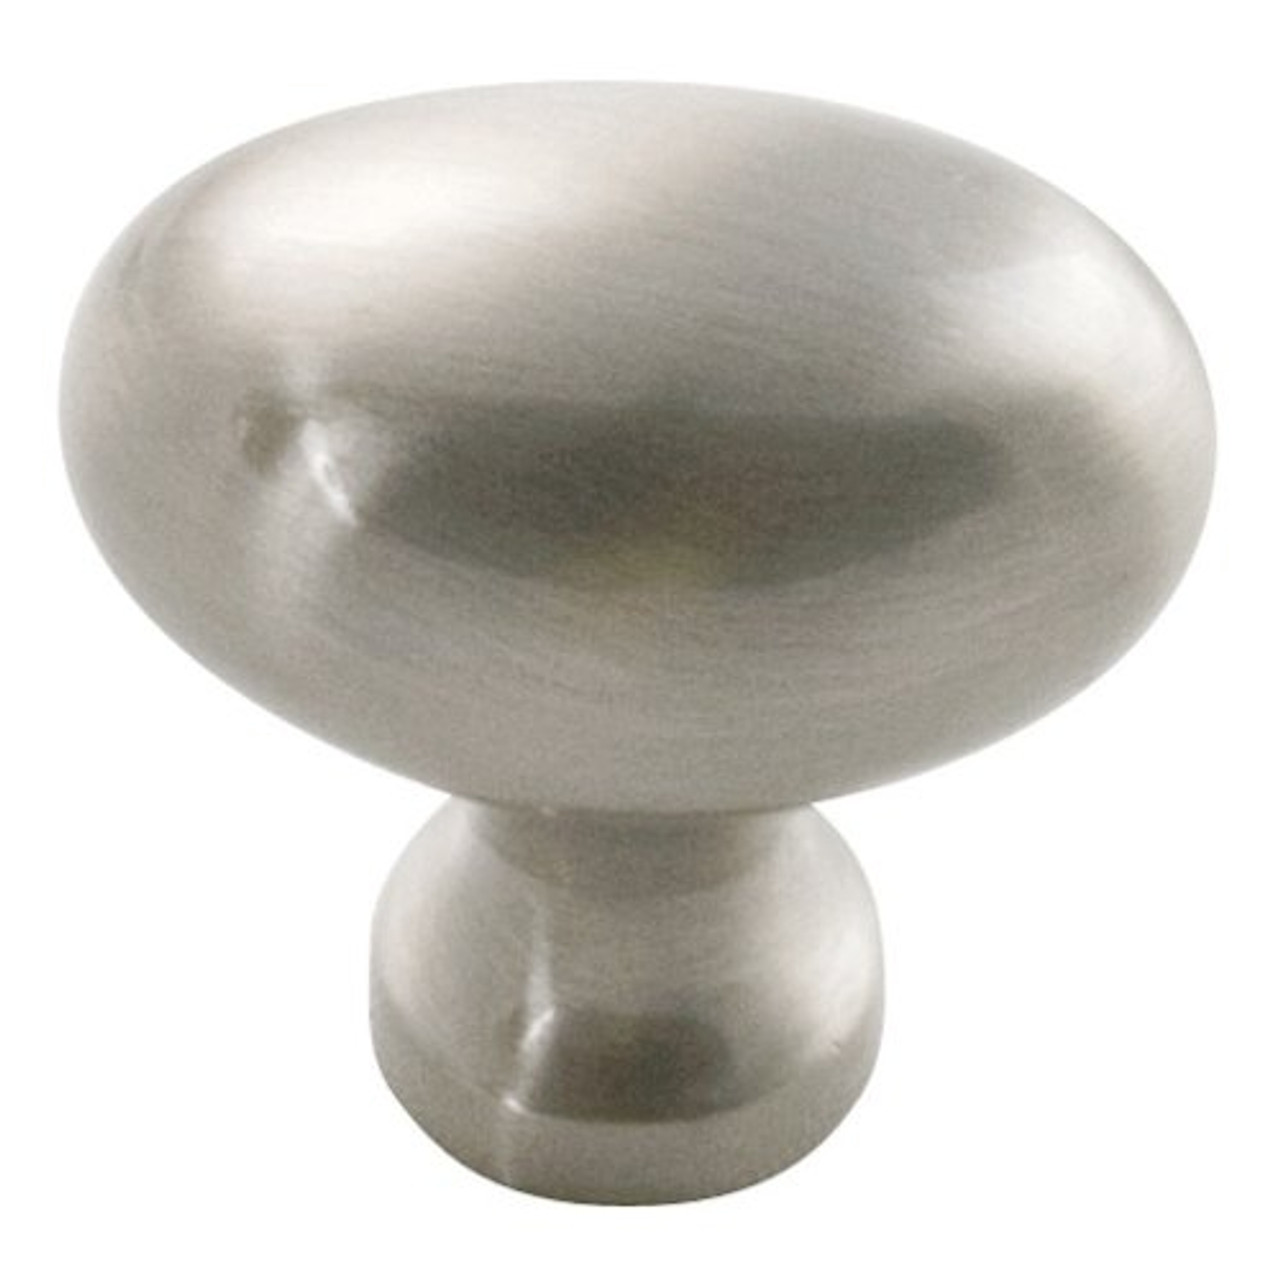 Hickory Hardware 1-1/4 INCH (32MM) WILLIAMSBURG OVAL CABINET KNOBS